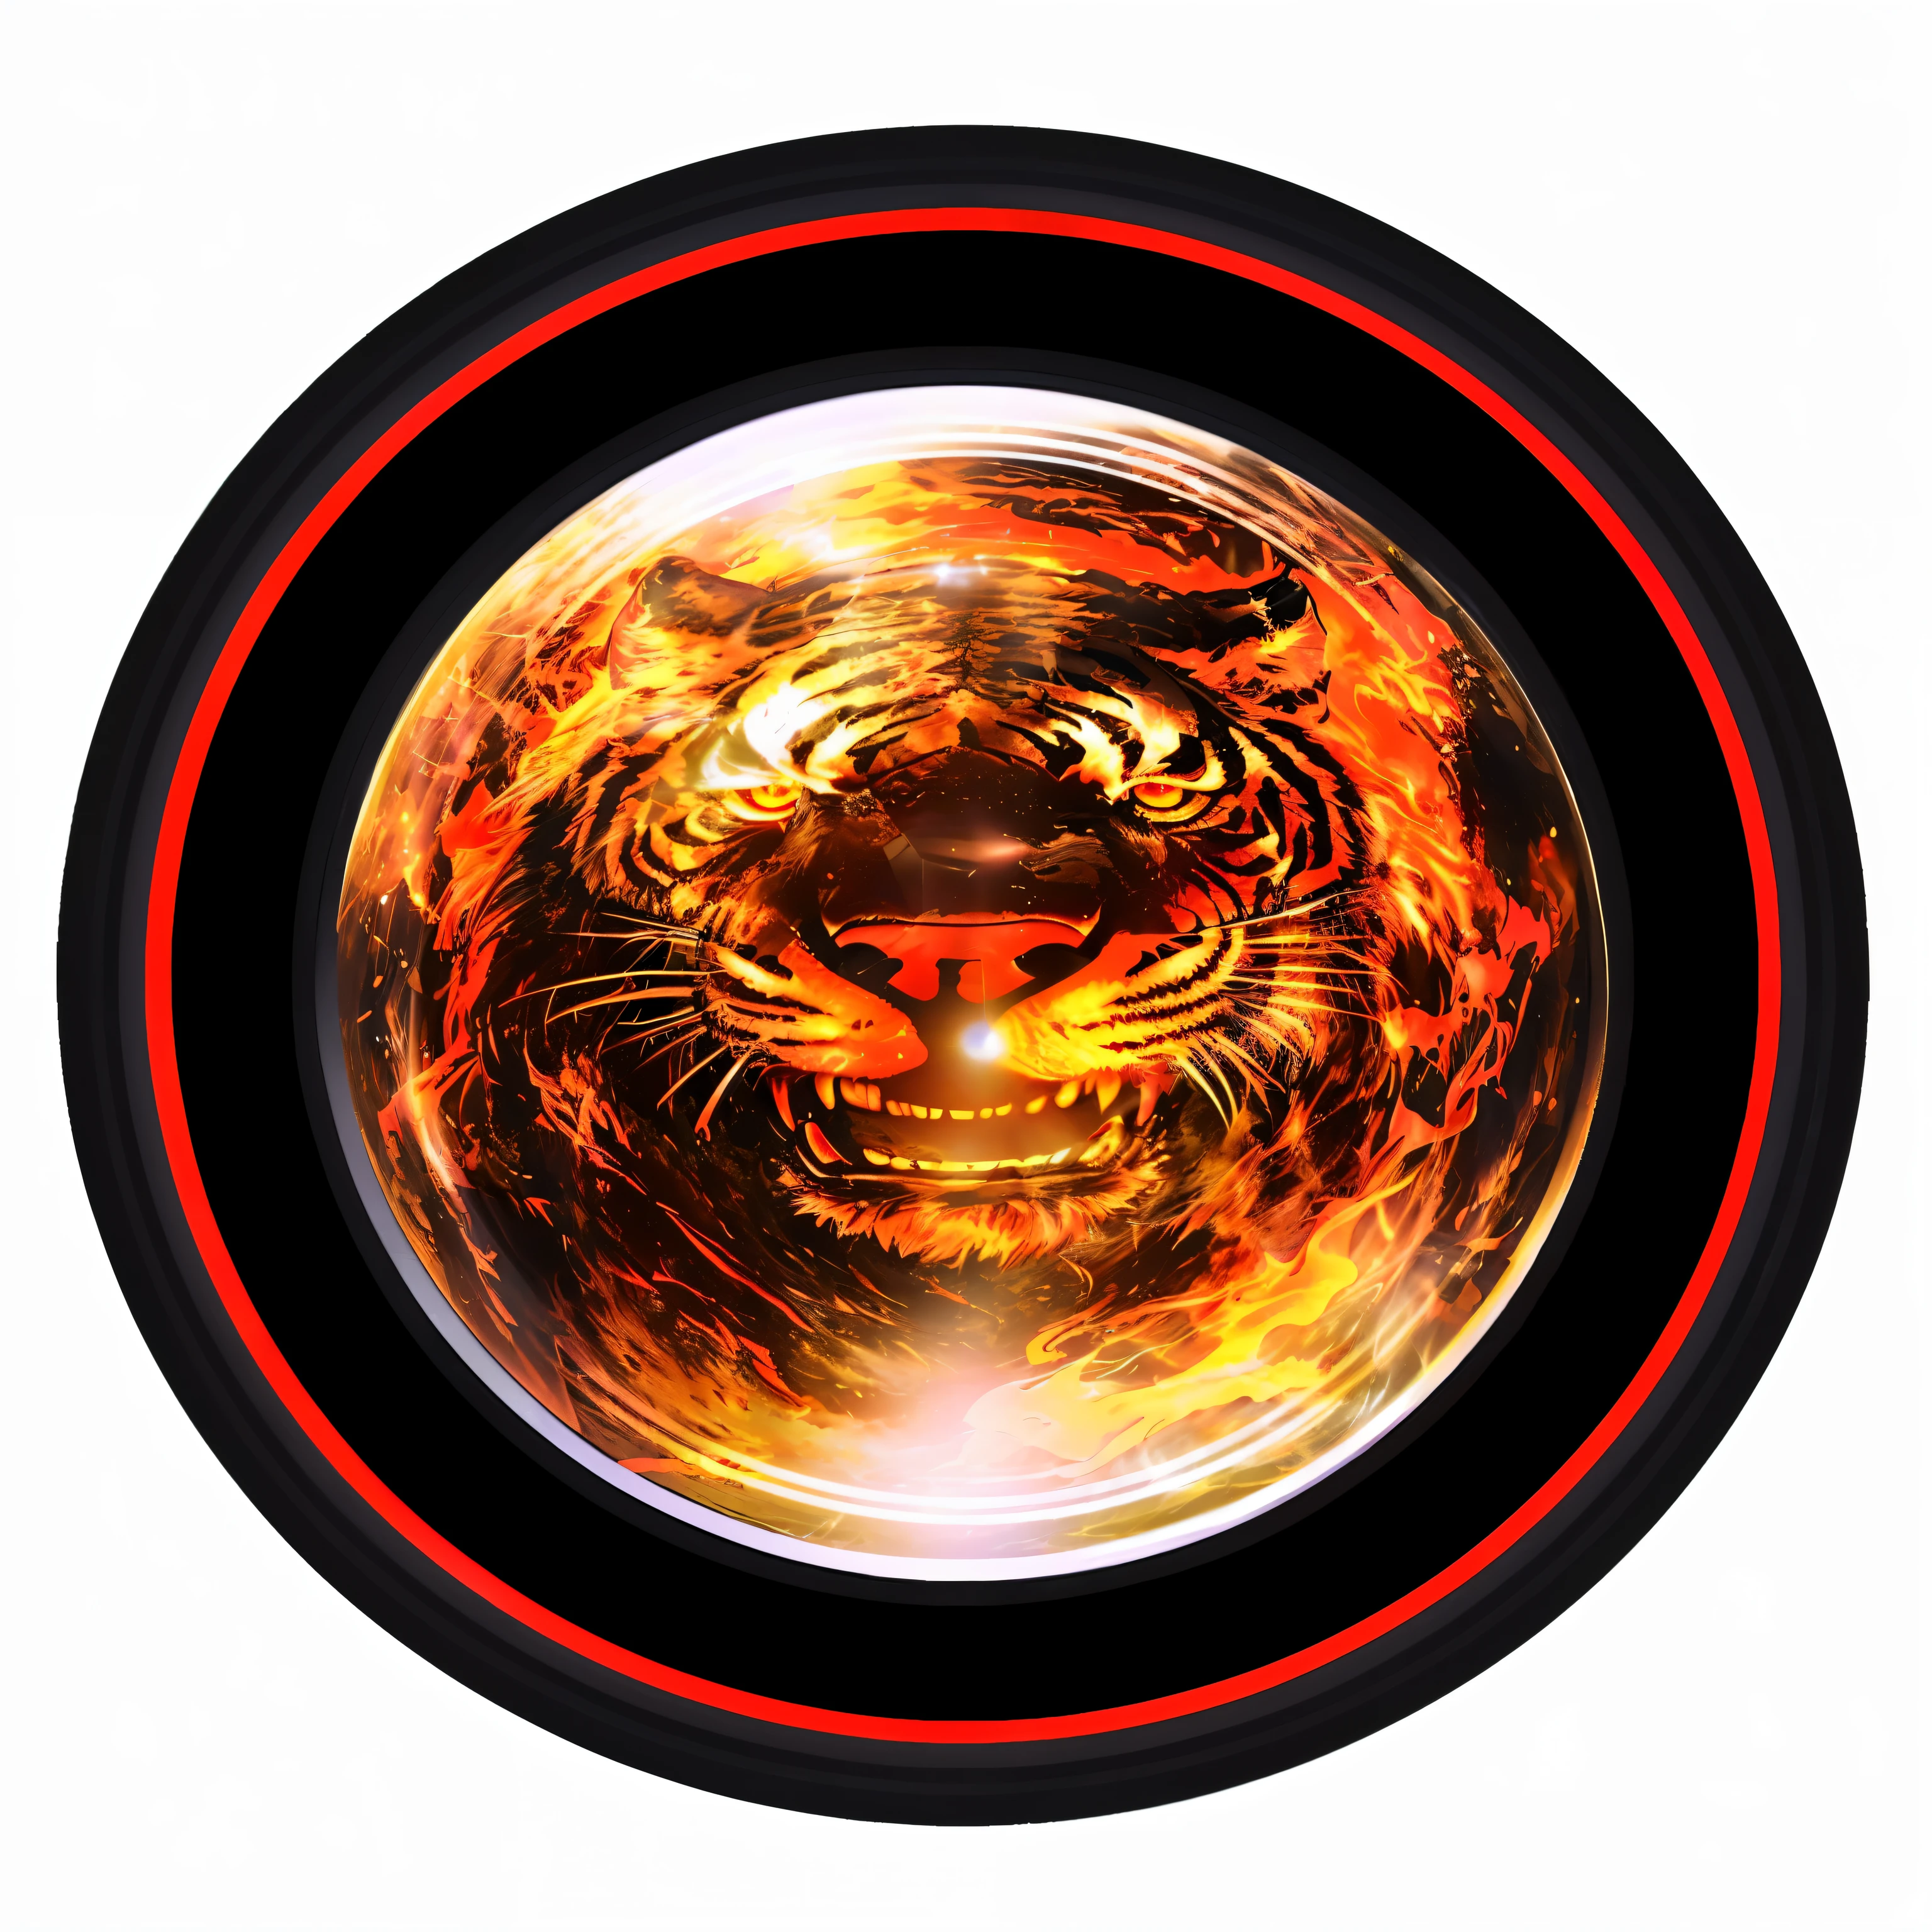 a close up of a fire tiger in a circular object, fire lion, tiger of fire flying, tiger_beast, glowing magma sphere, a large sphere of red energy, black orb of fire, fractal burning halo, red fire eyes, ring of fire, (fire), tiger, lens flair, glowing fiery red eyes, lense flares, fire eyes